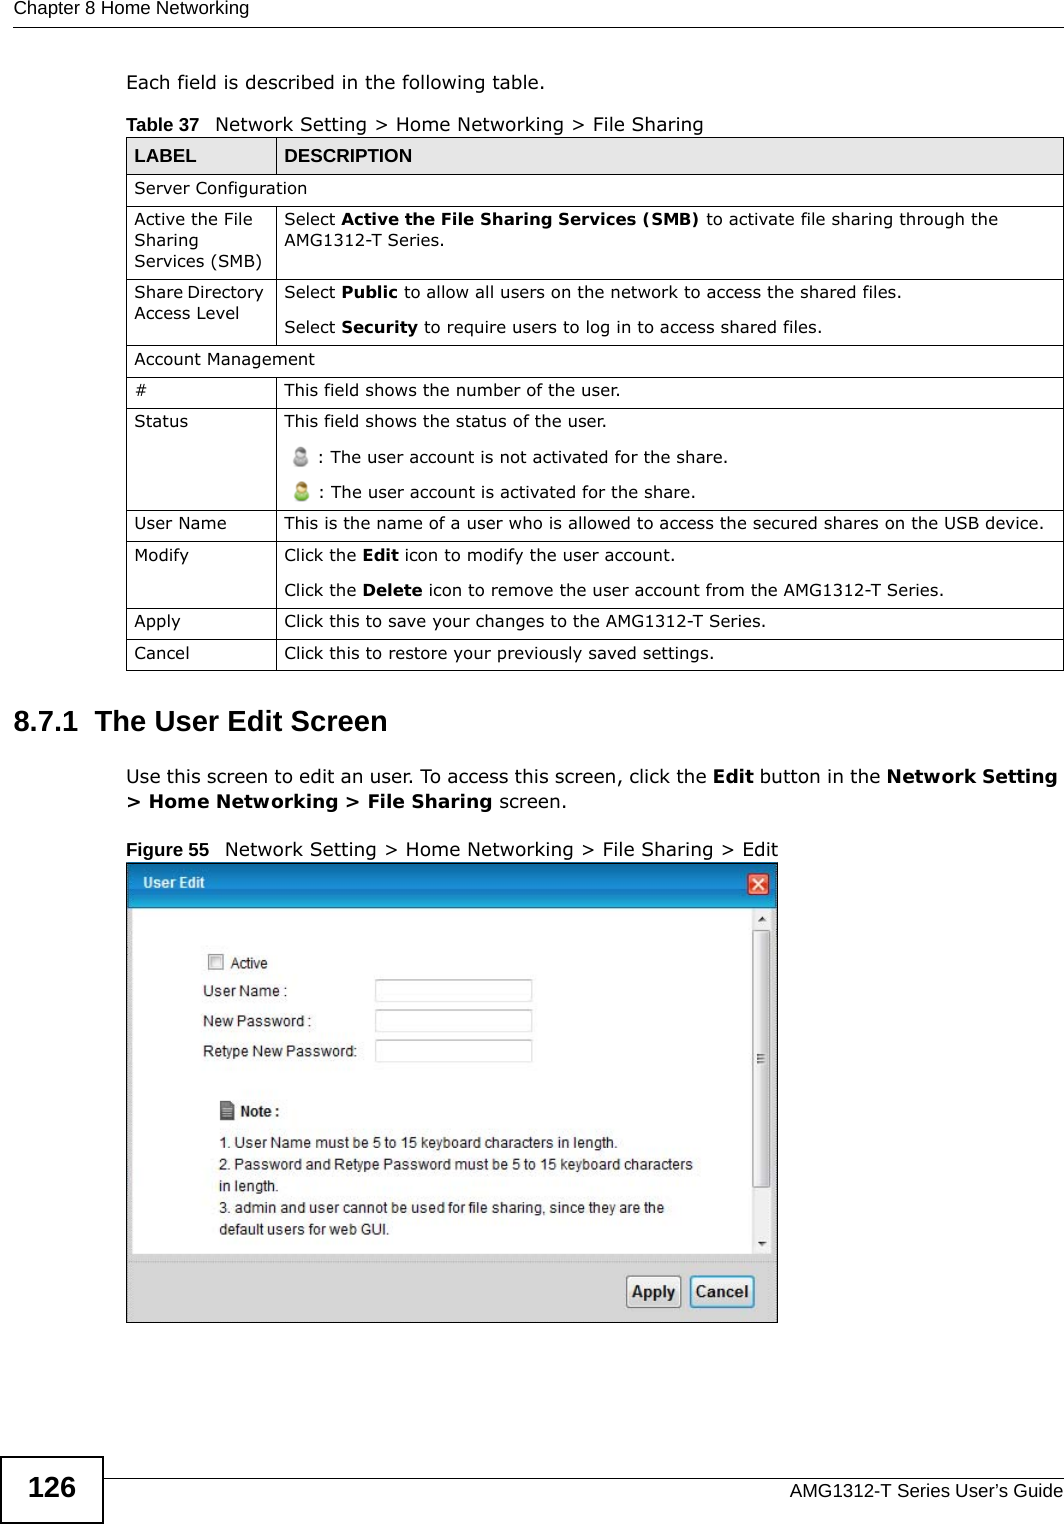 Chapter 8 Home NetworkingAMG1312-T Series User’s Guide126Each field is described in the following table.8.7.1  The User Edit ScreenUse this screen to edit an user. To access this screen, click the Edit button in the Network Setting &gt; Home Networking &gt; File Sharing screen.Figure 55   Network Setting &gt; Home Networking &gt; File Sharing &gt; EditTable 37   Network Setting &gt; Home Networking &gt; File SharingLABEL DESCRIPTIONServer ConfigurationActive the File Sharing Services (SMB)Select Active the File Sharing Services (SMB) to activate file sharing through the AMG1312-T Series. Share Directory Access LevelSelect Public to allow all users on the network to access the shared files.Select Security to require users to log in to access shared files.Account Management#This field shows the number of the user.Status This field shows the status of the user.: The user account is not activated for the share.: The user account is activated for the share.User Name This is the name of a user who is allowed to access the secured shares on the USB device.Modify Click the Edit icon to modify the user account.Click the Delete icon to remove the user account from the AMG1312-T Series.Apply Click this to save your changes to the AMG1312-T Series.Cancel Click this to restore your previously saved settings.